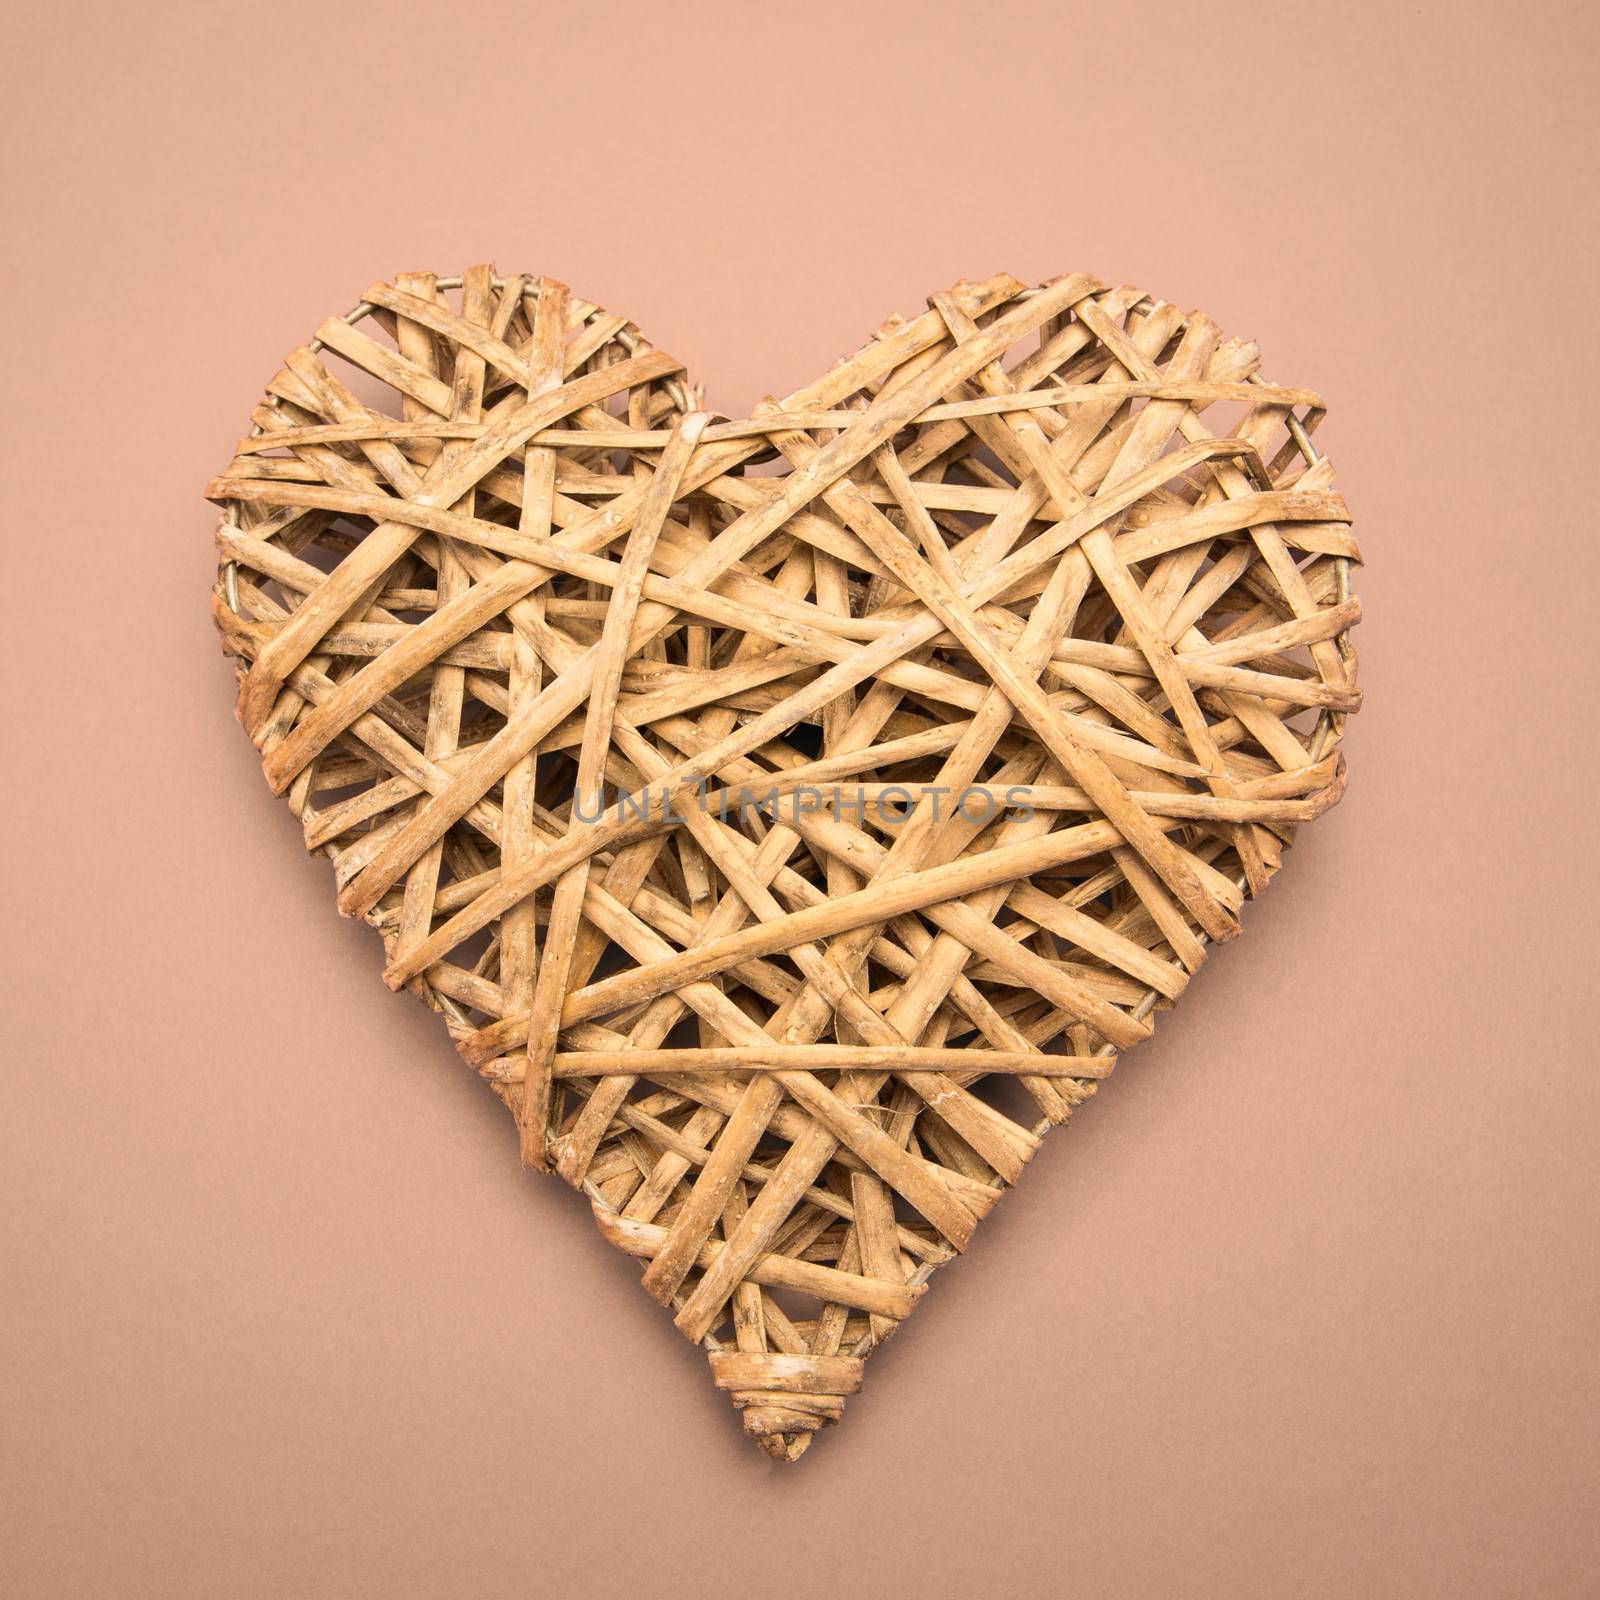 Wicker heart ornament on pink background